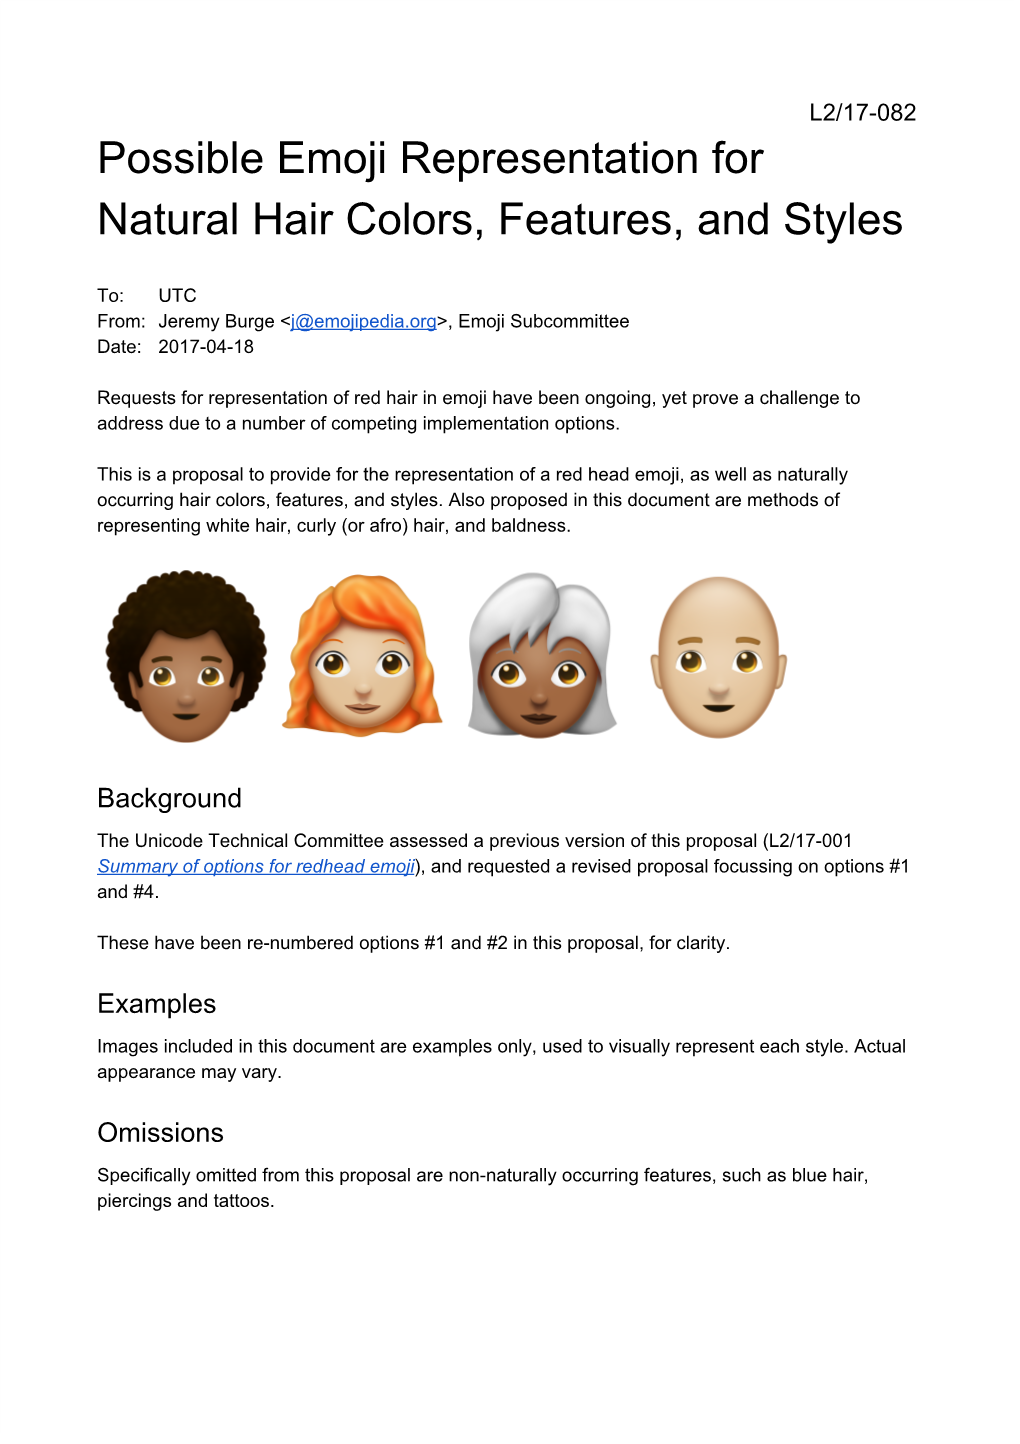 Natural Hair Colors, Features, and Styles